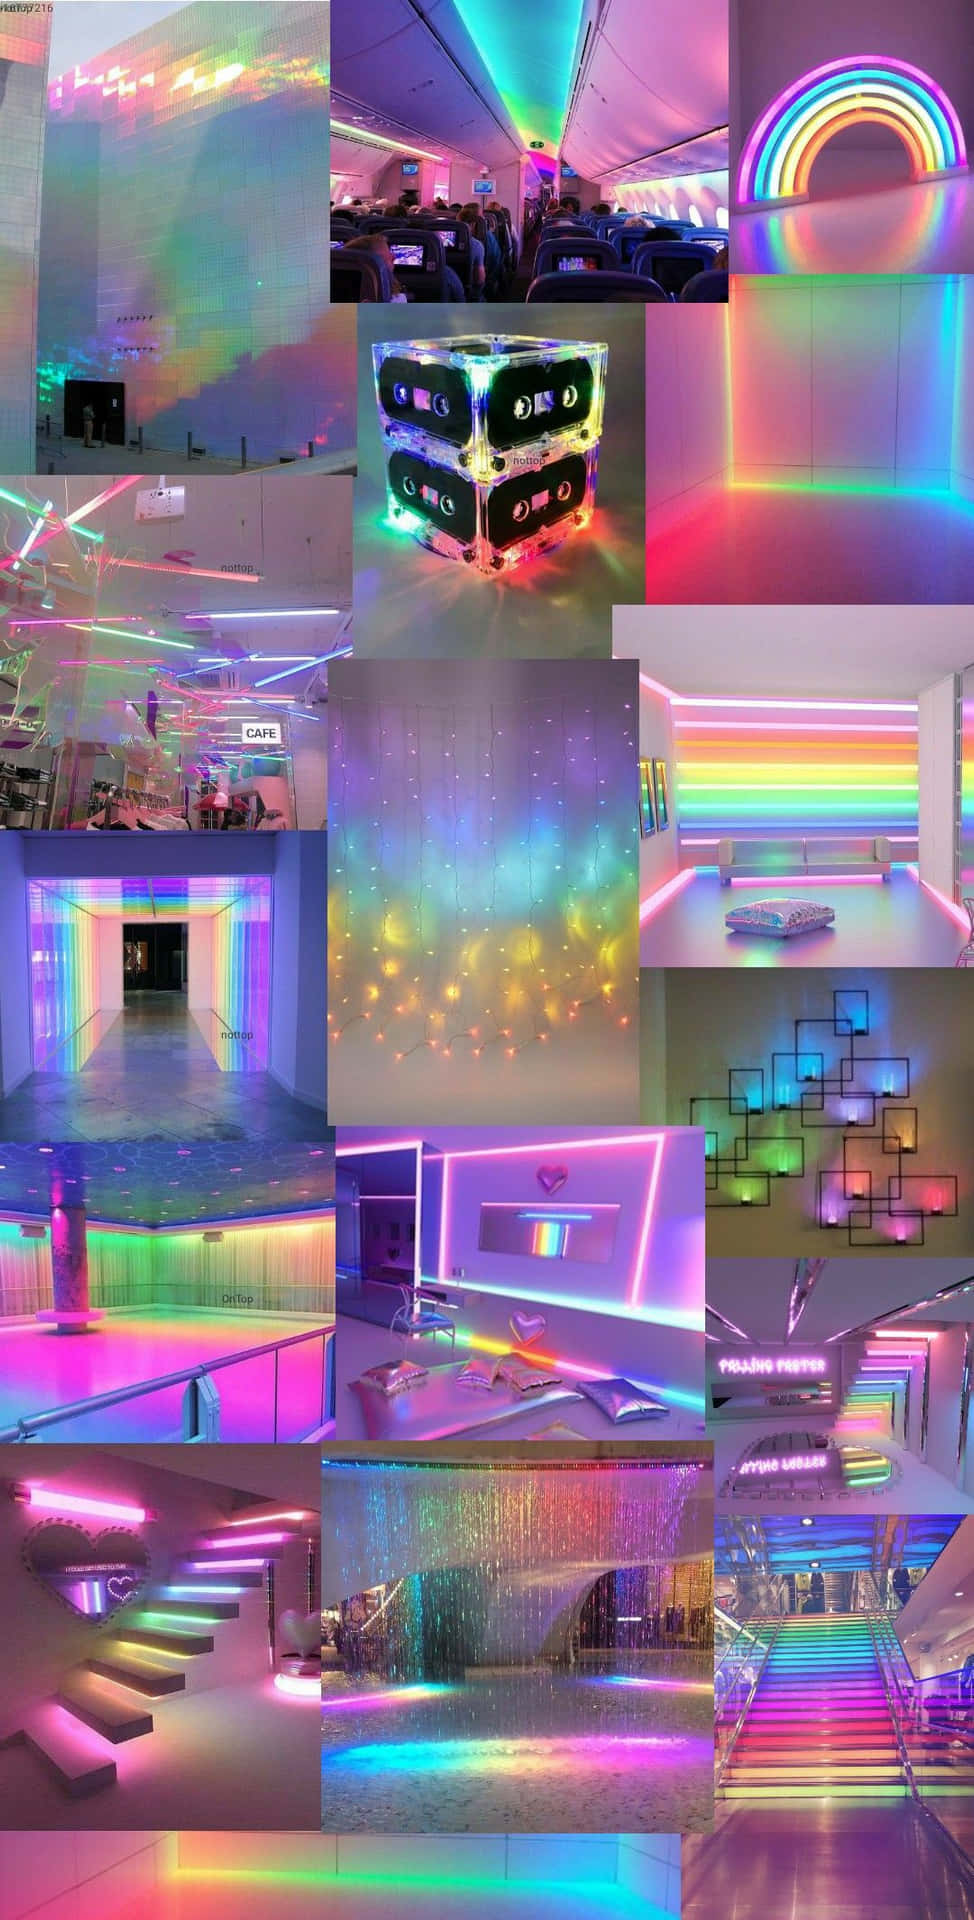 Brighten up your day with a colorful Rainbow Aesthetic.